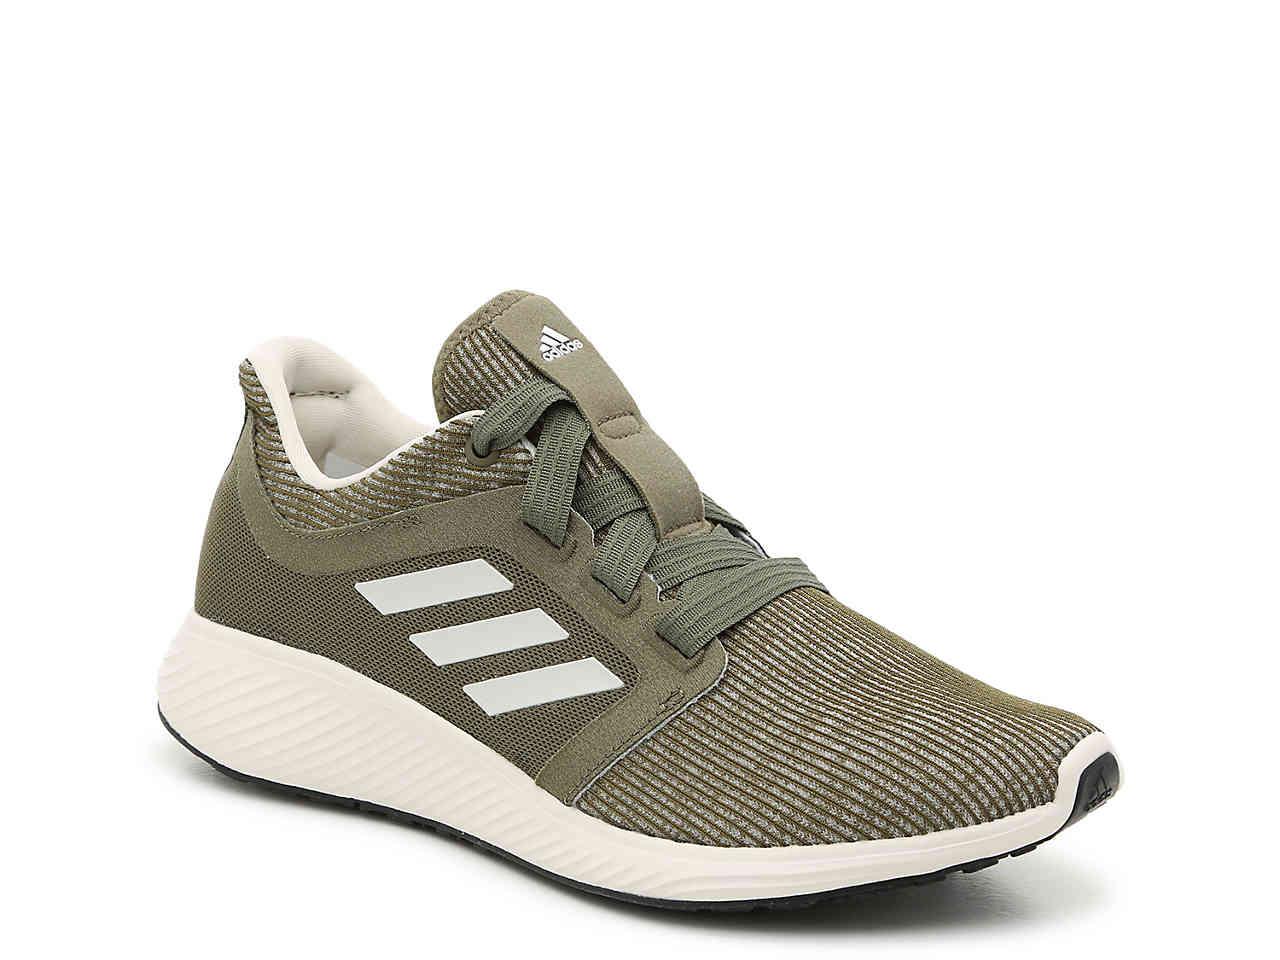 Adidas Rubber Edge Lux 3 Lightweight Running Shoe In Olive Green Green